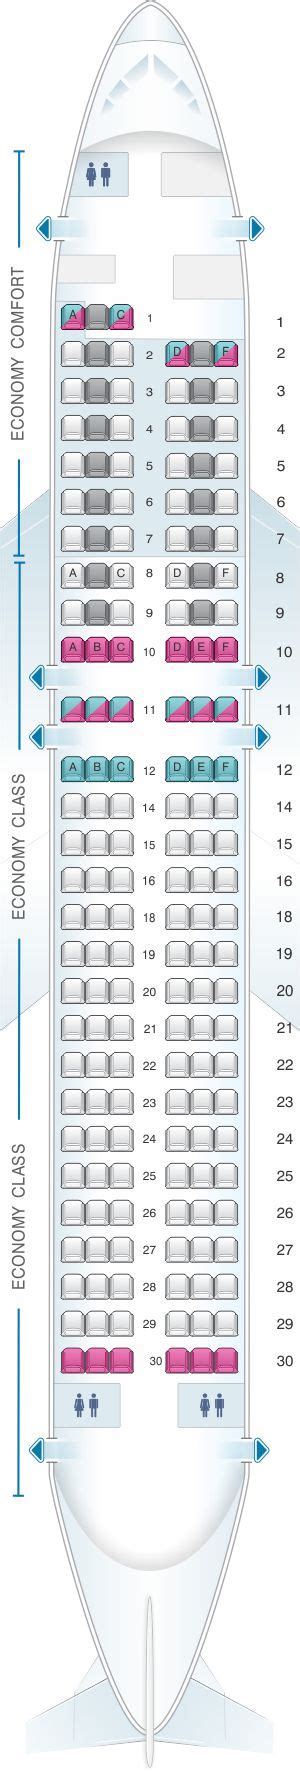 Alitalia Airlines Seating Chart